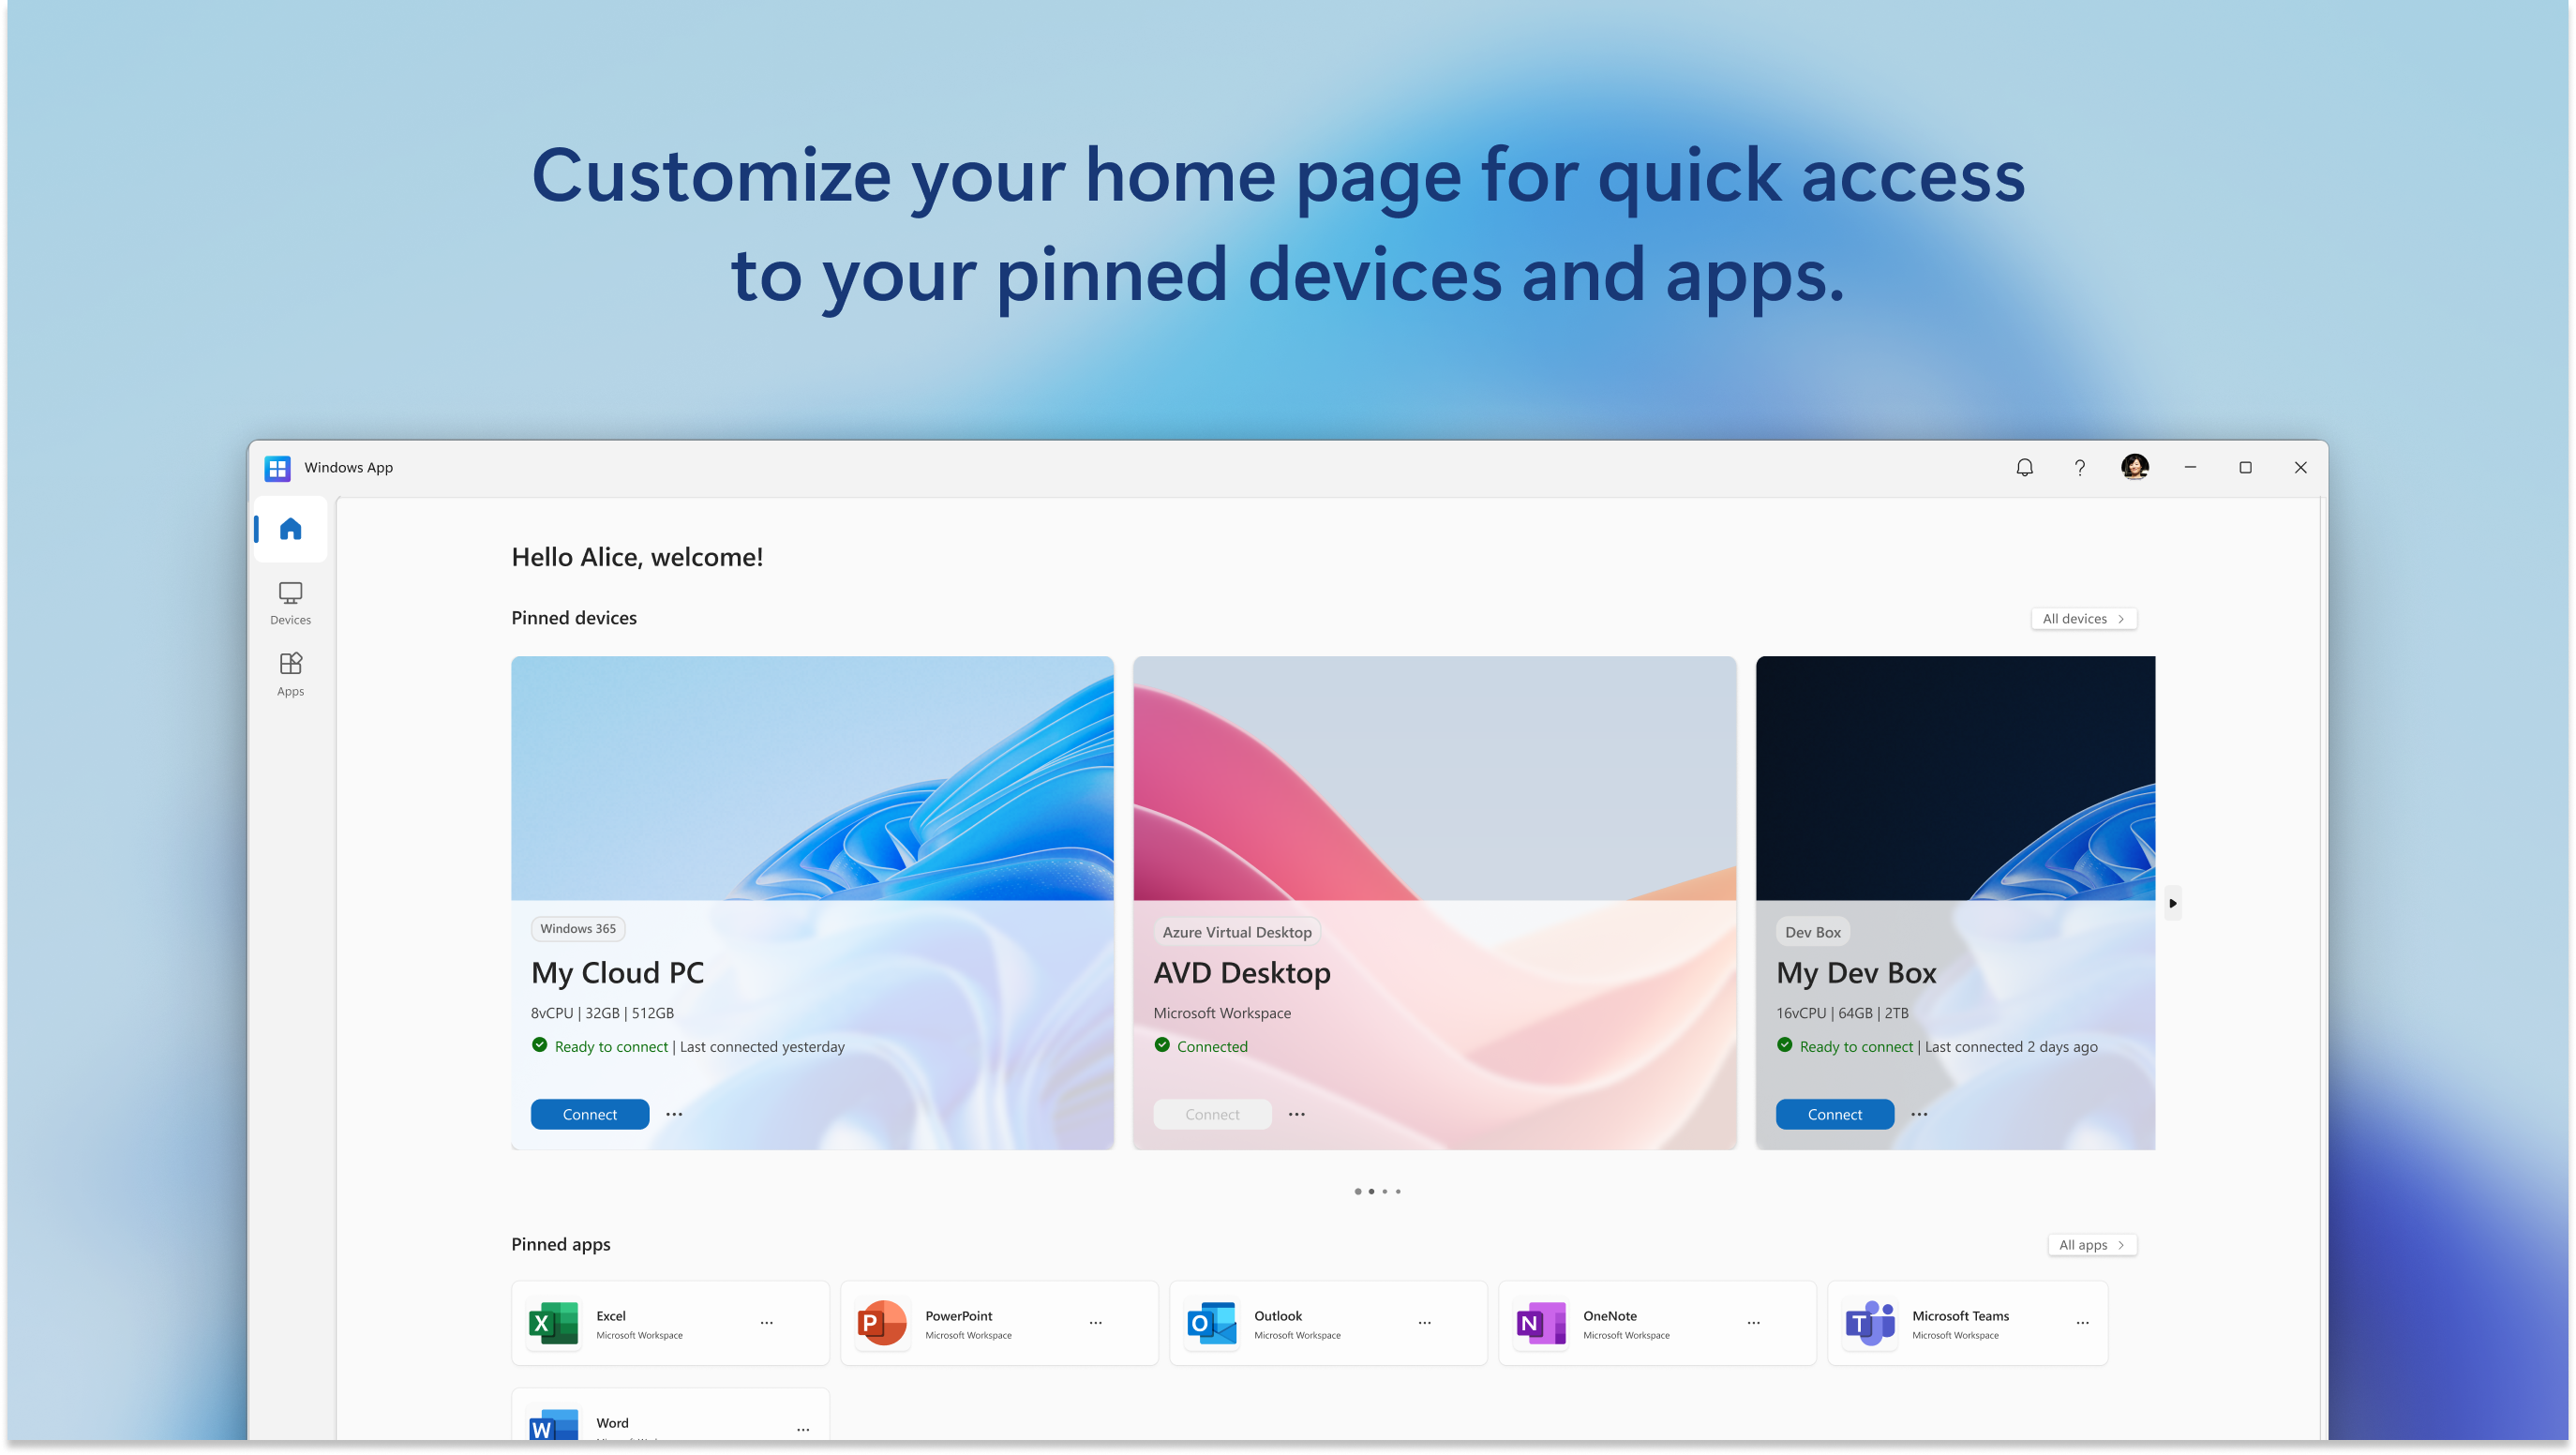 new-windows-app-lets-you-access-cloud-pcs-from-anywhere